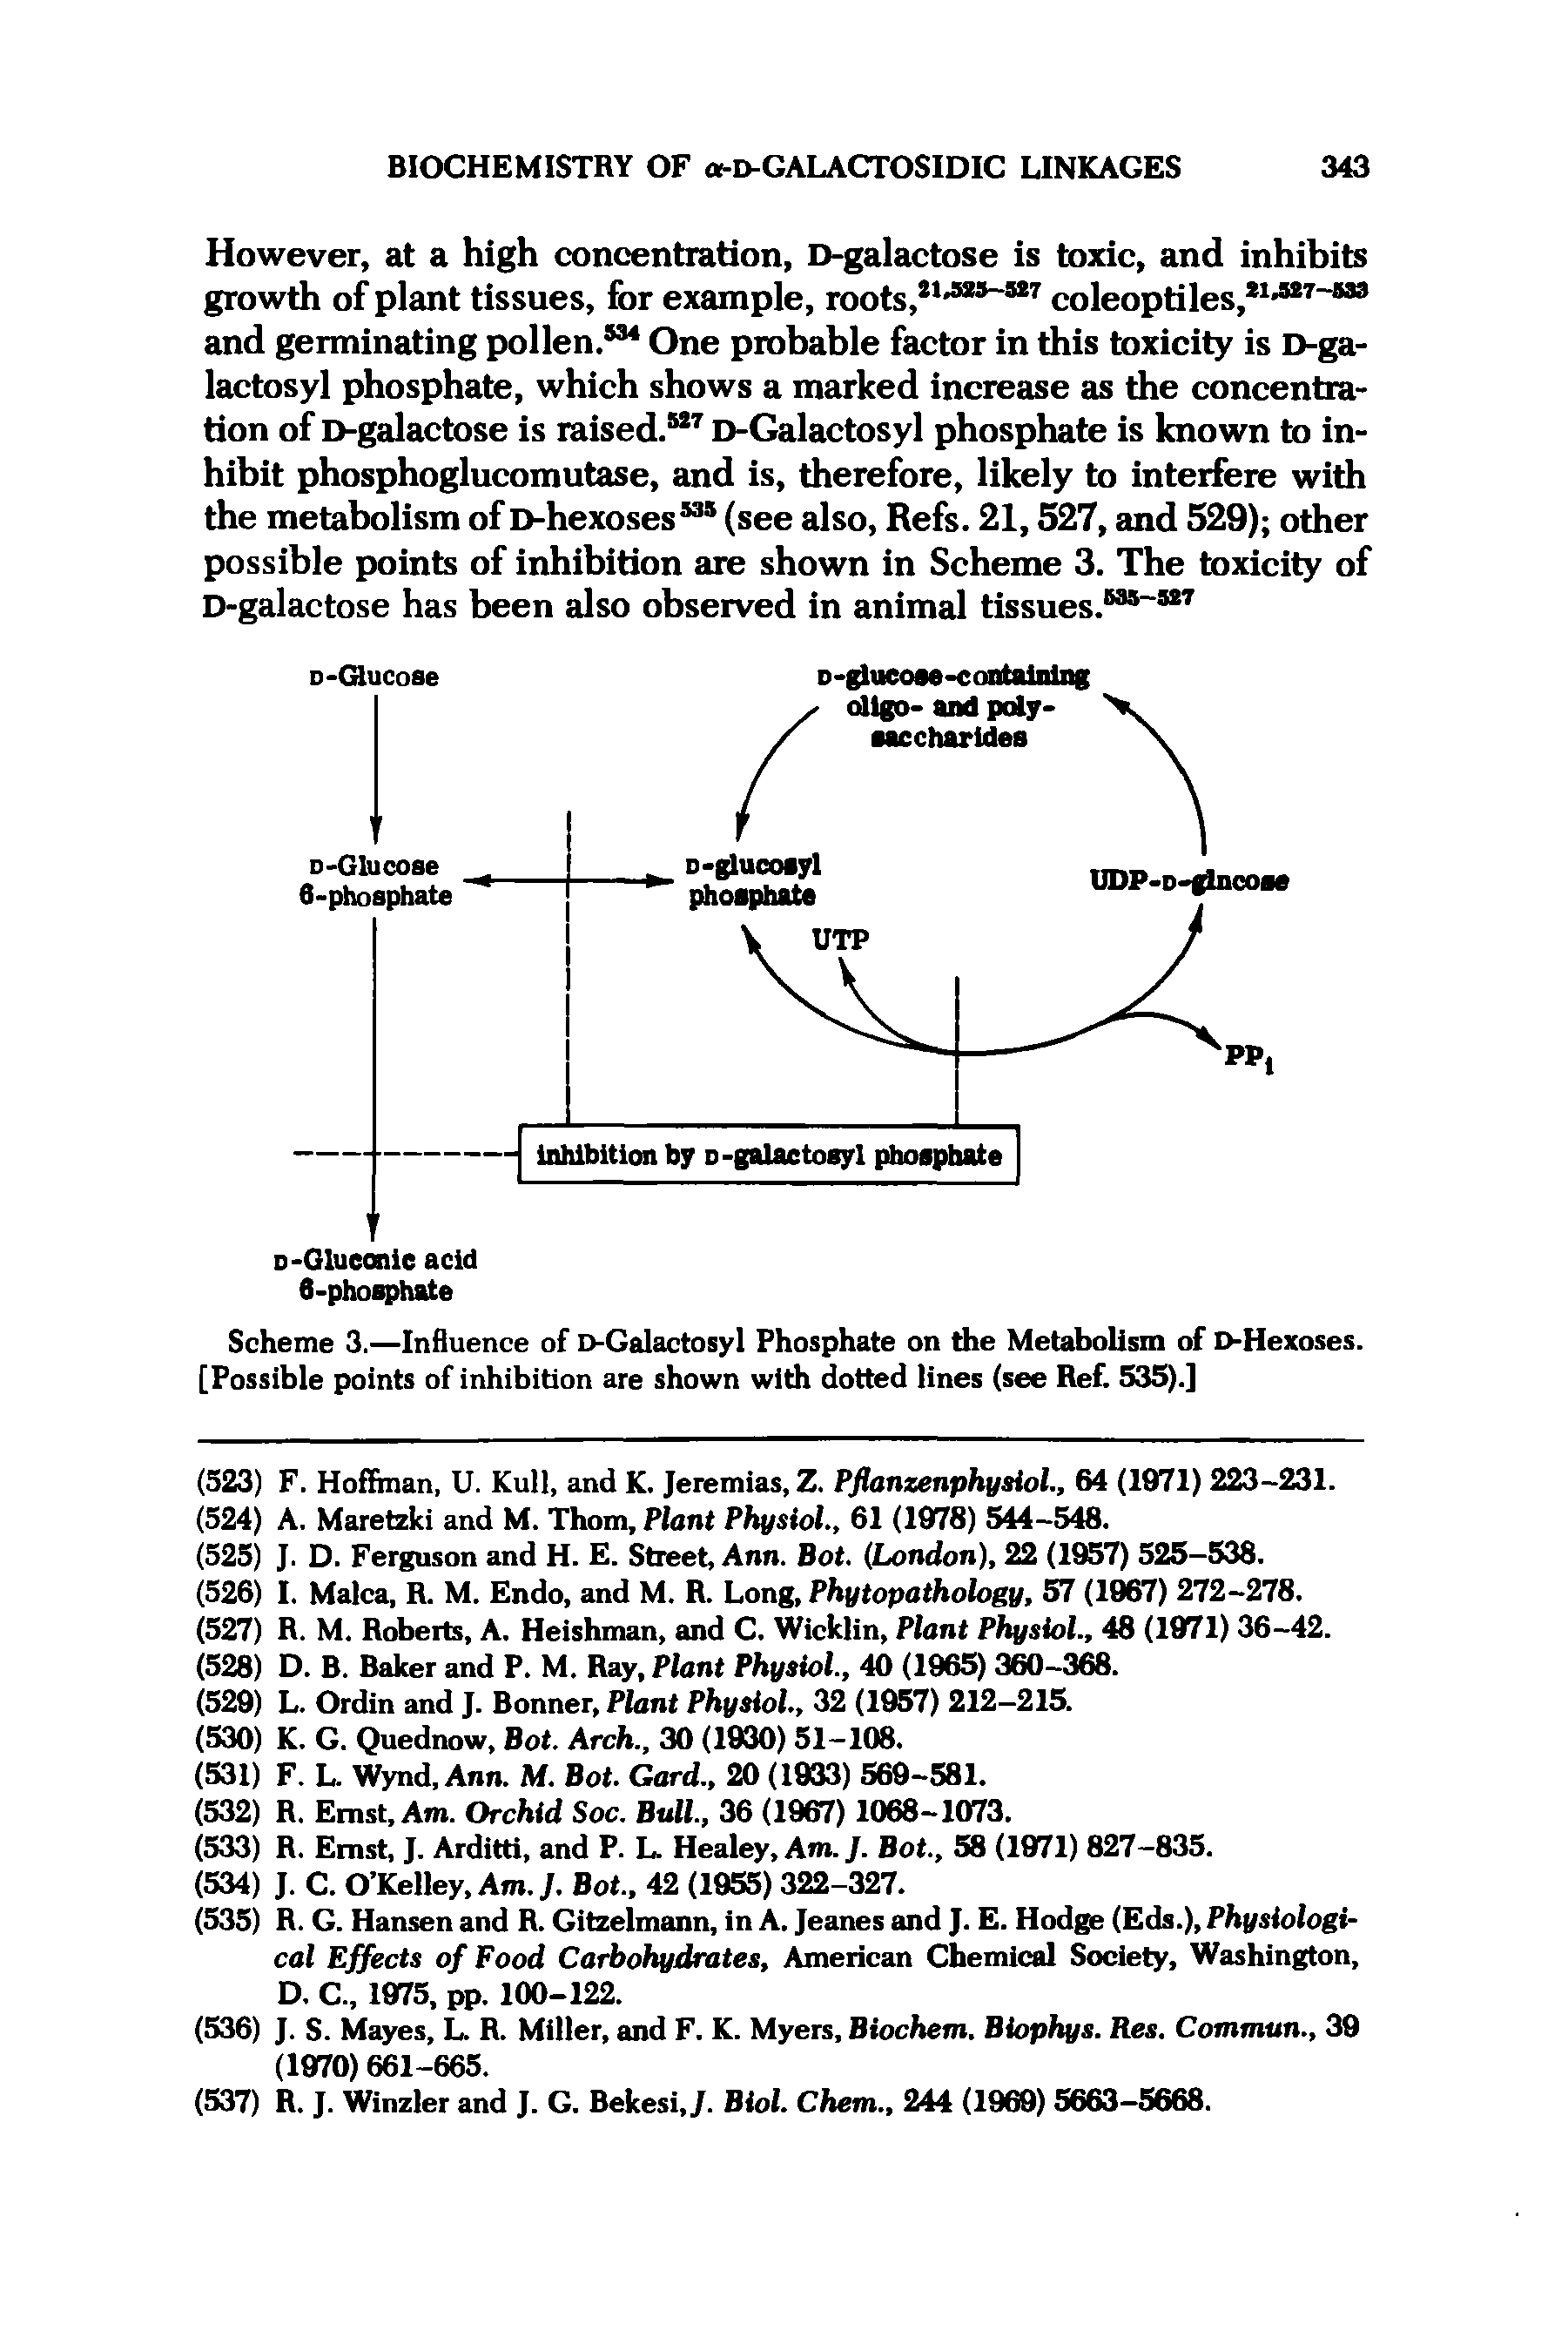 Scheme 3.—Influence of D-Galactosyl Phosphate on the Metabolism of D-Hexoses. [Possible points of inhibition are shown with dotted lines (see Ref. 535).]...